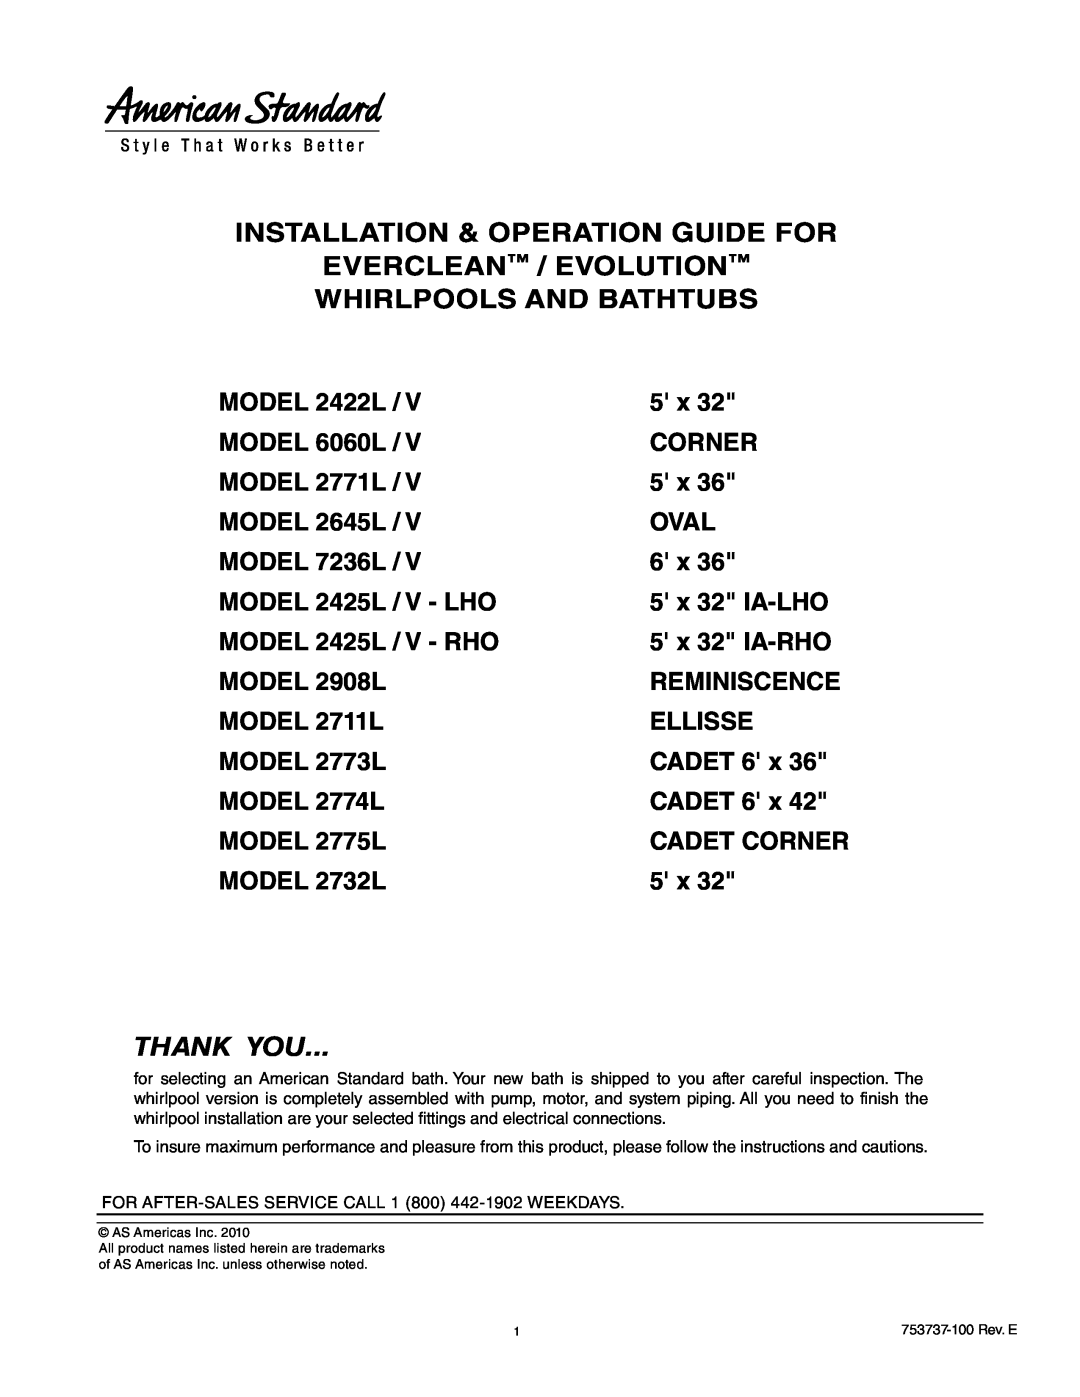 American Standard 2422L / V manual Installation & Operation Guide For Everclean / Evolution, Whirlpools And Bathtubs 